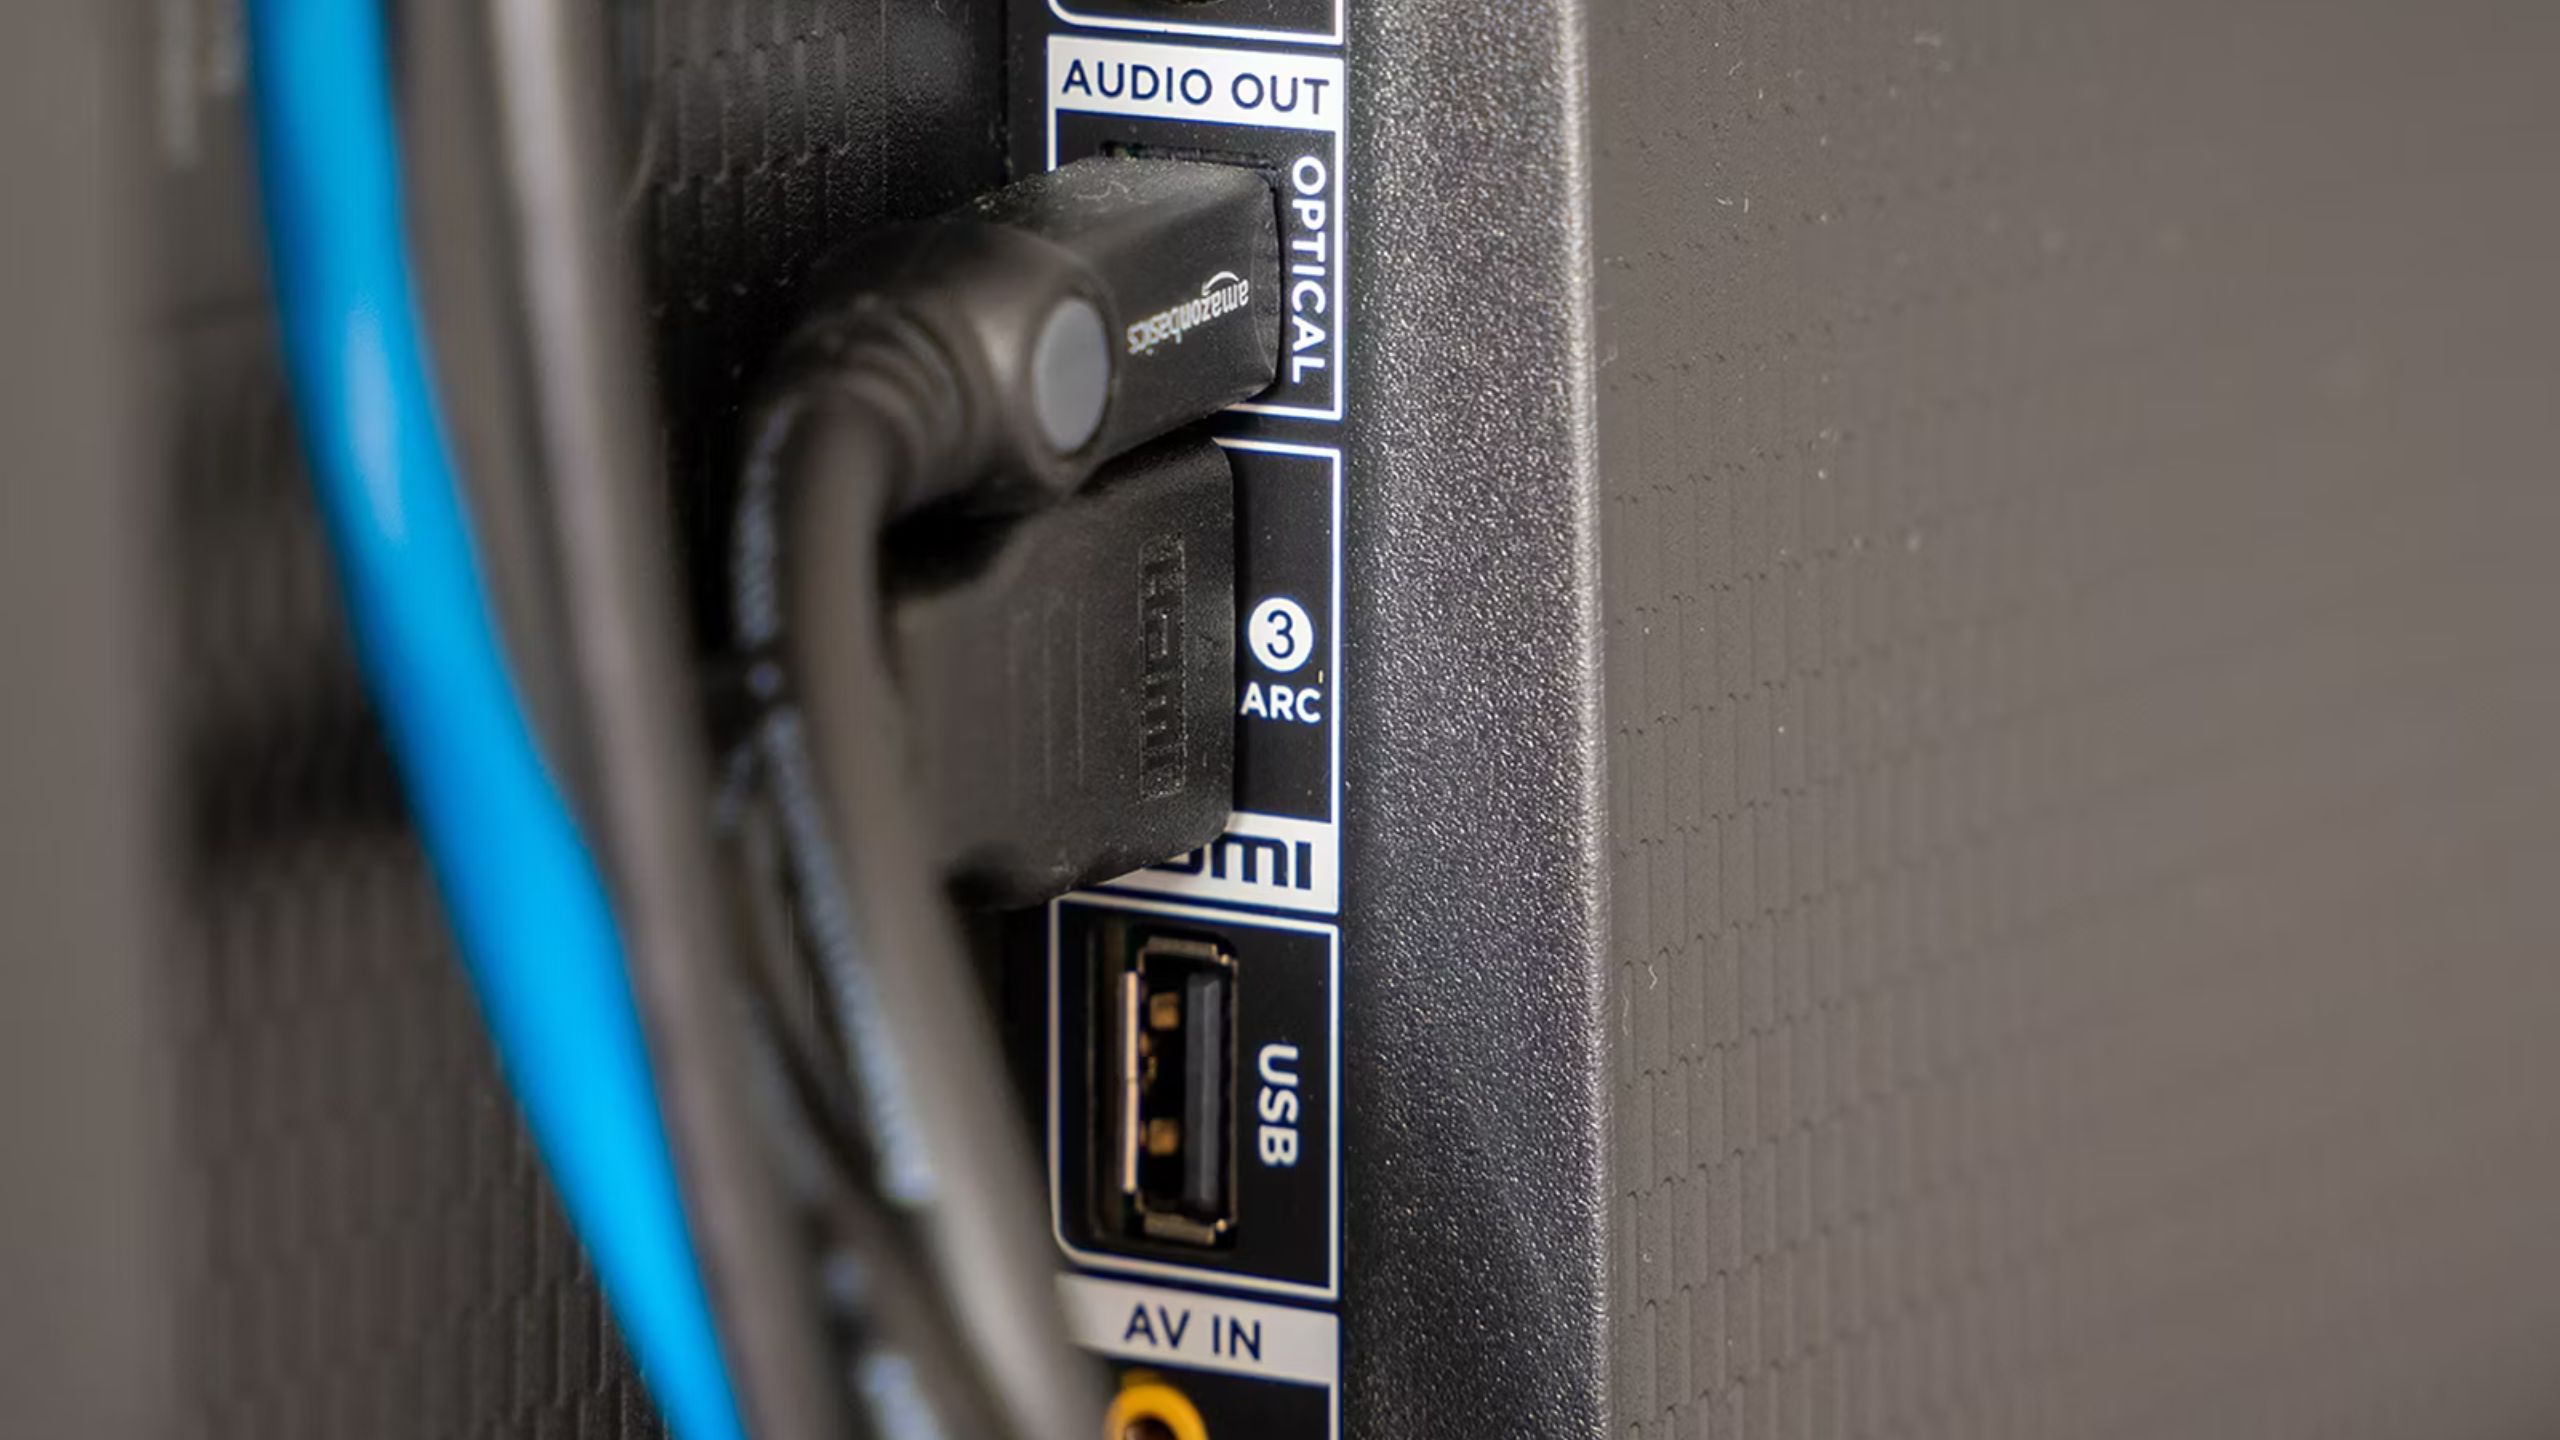 HDMI, optical, and USB ports on a TV.